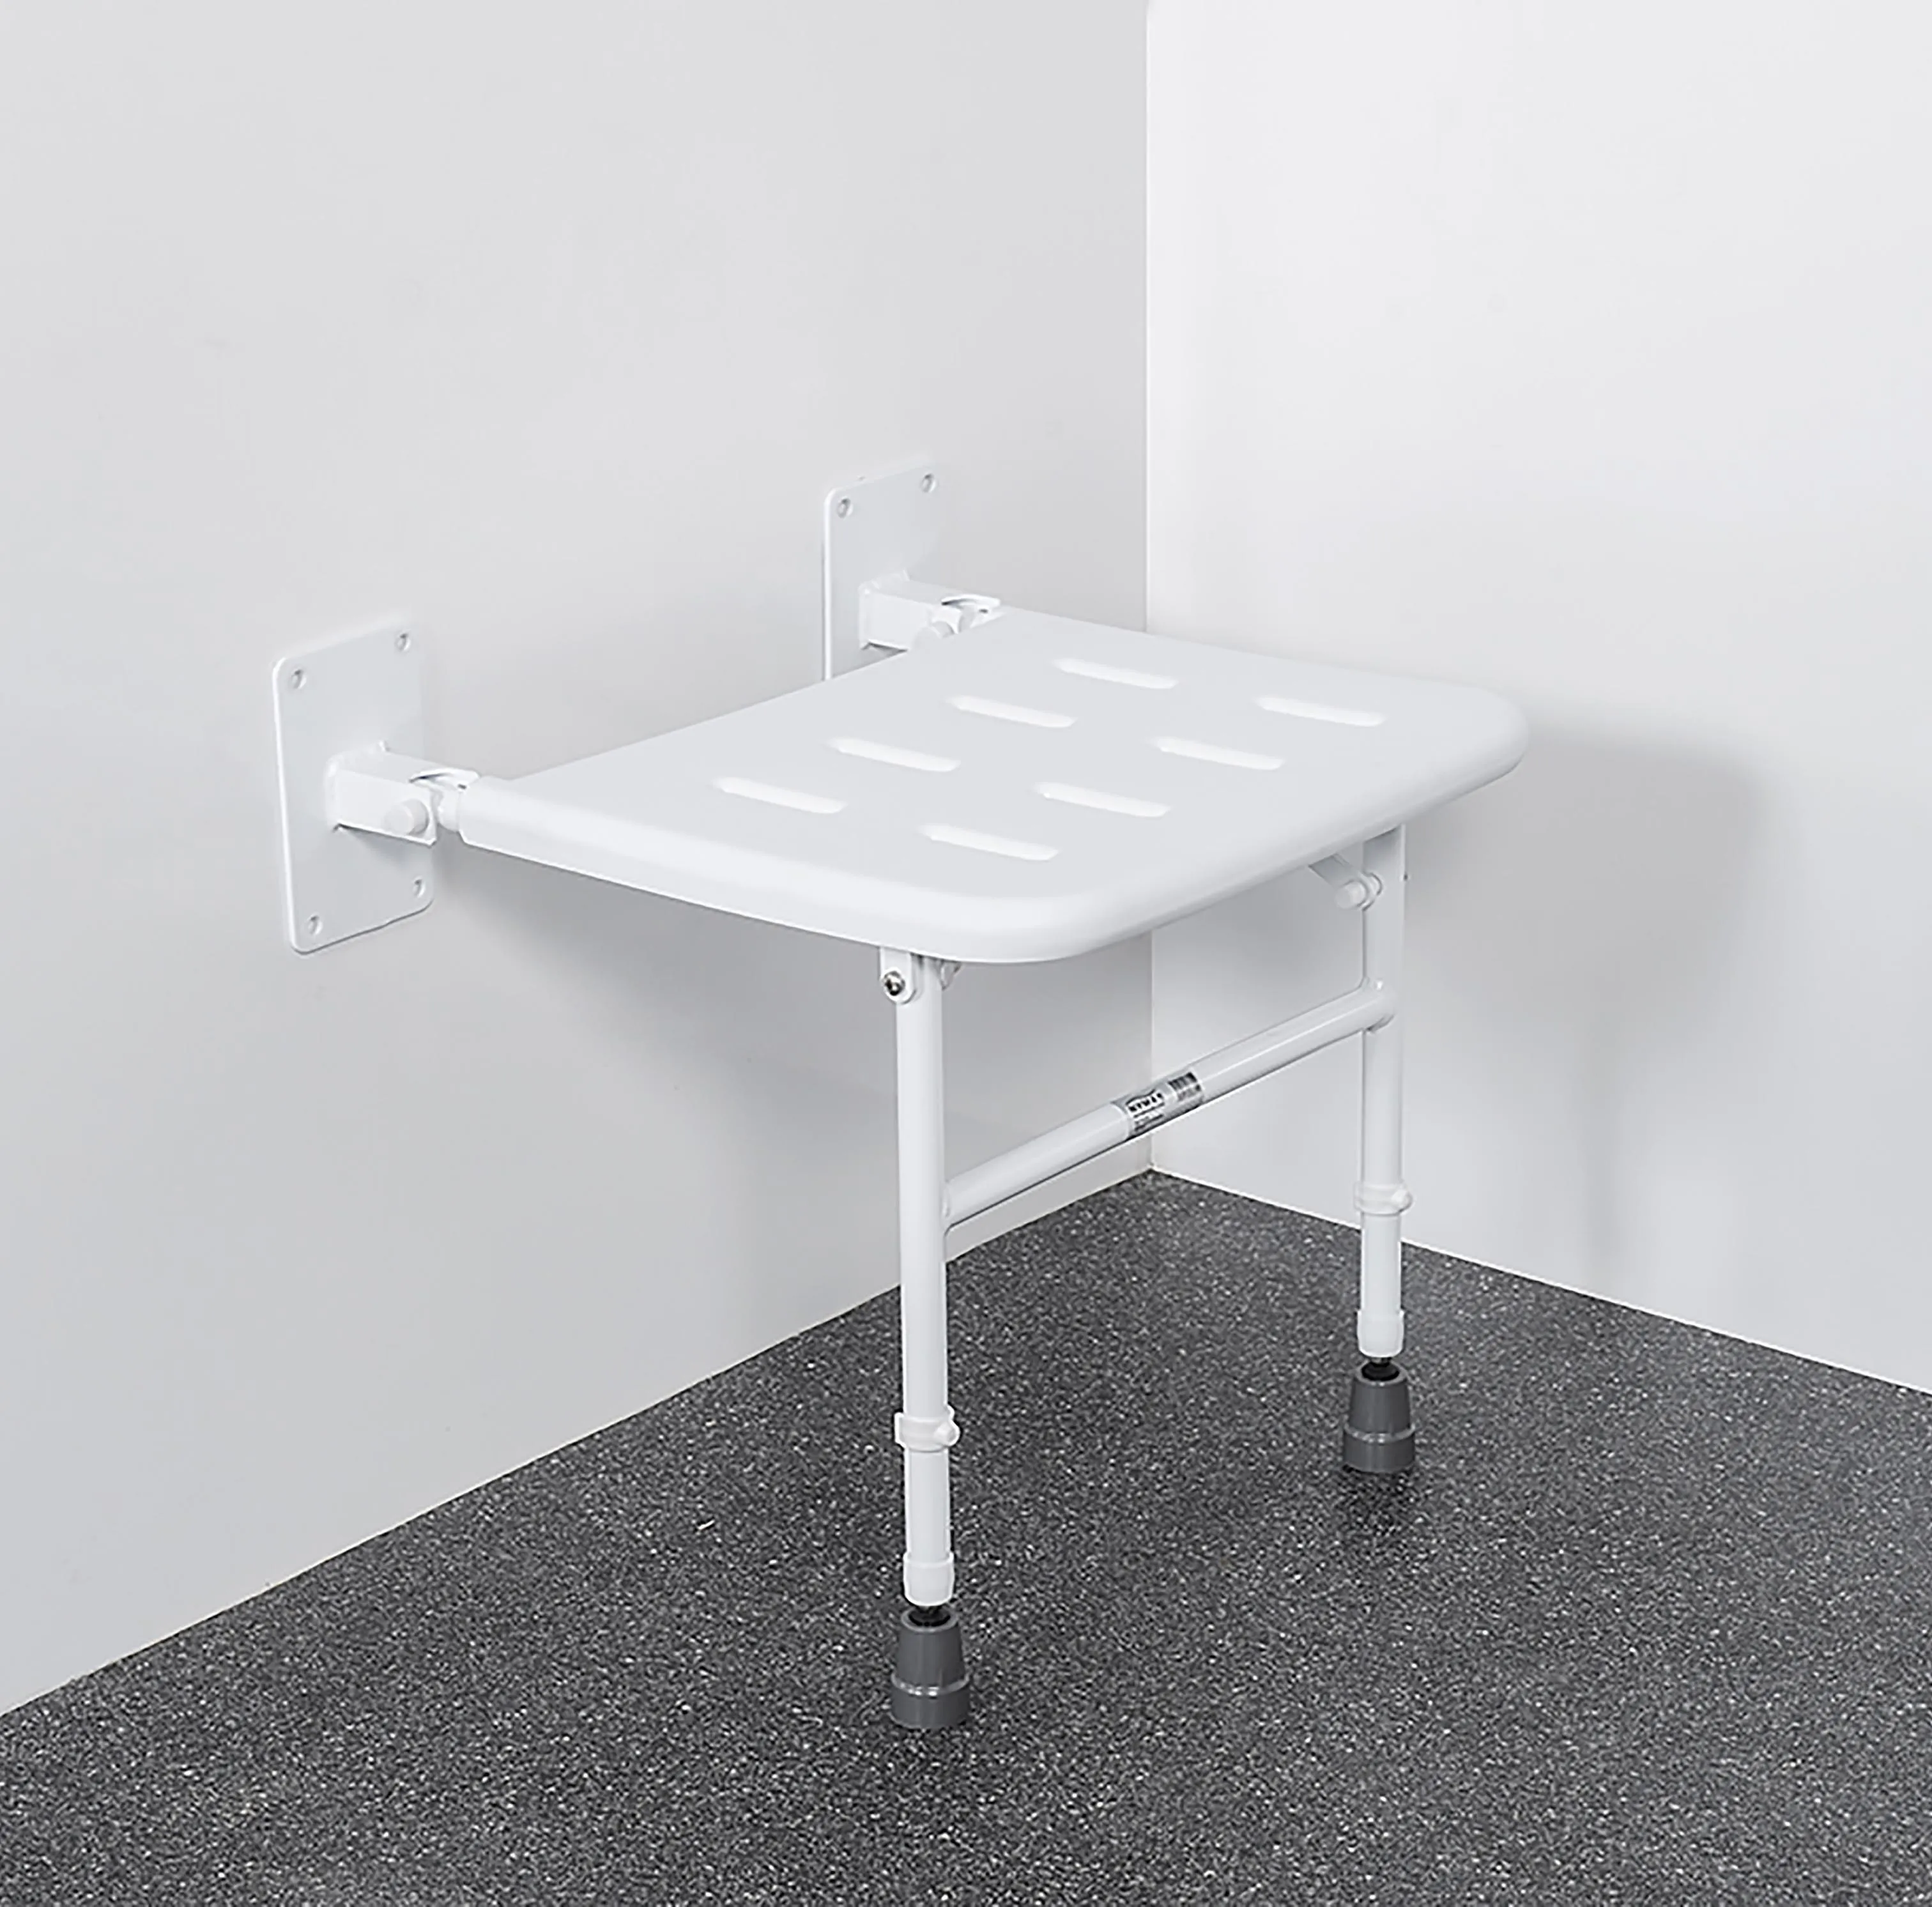 NymaPRO Wall Mounted Shower Seat with Legs White - 130202/WH